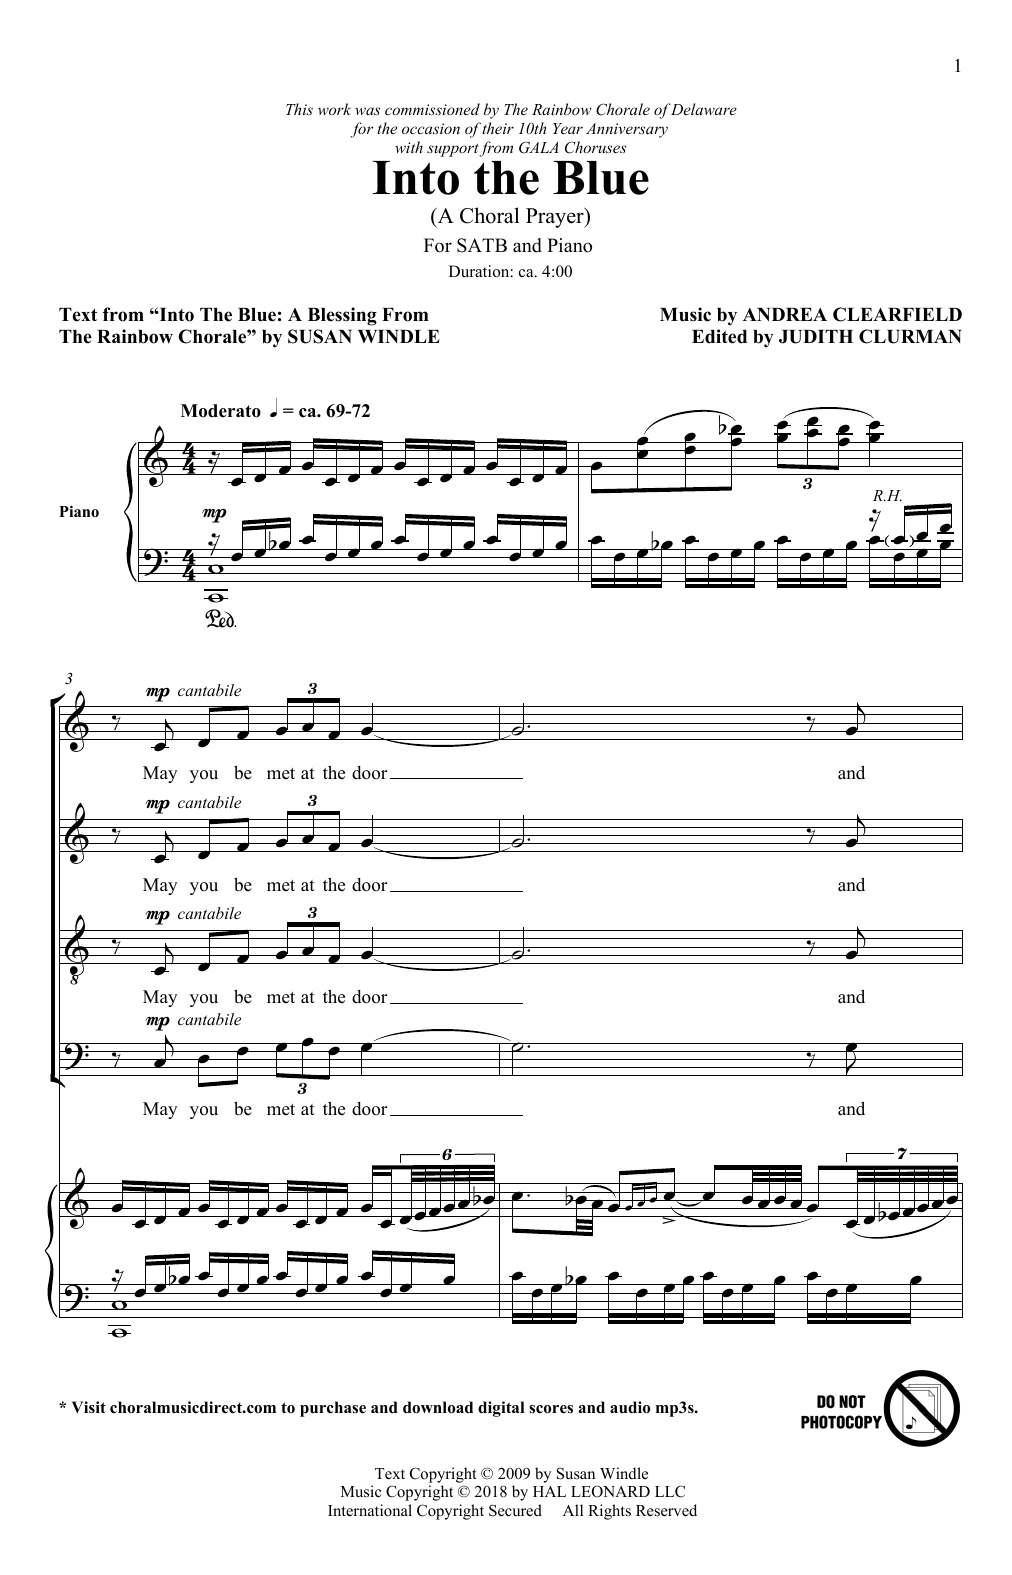 Into The Blue: A Choral Prayer sheet music